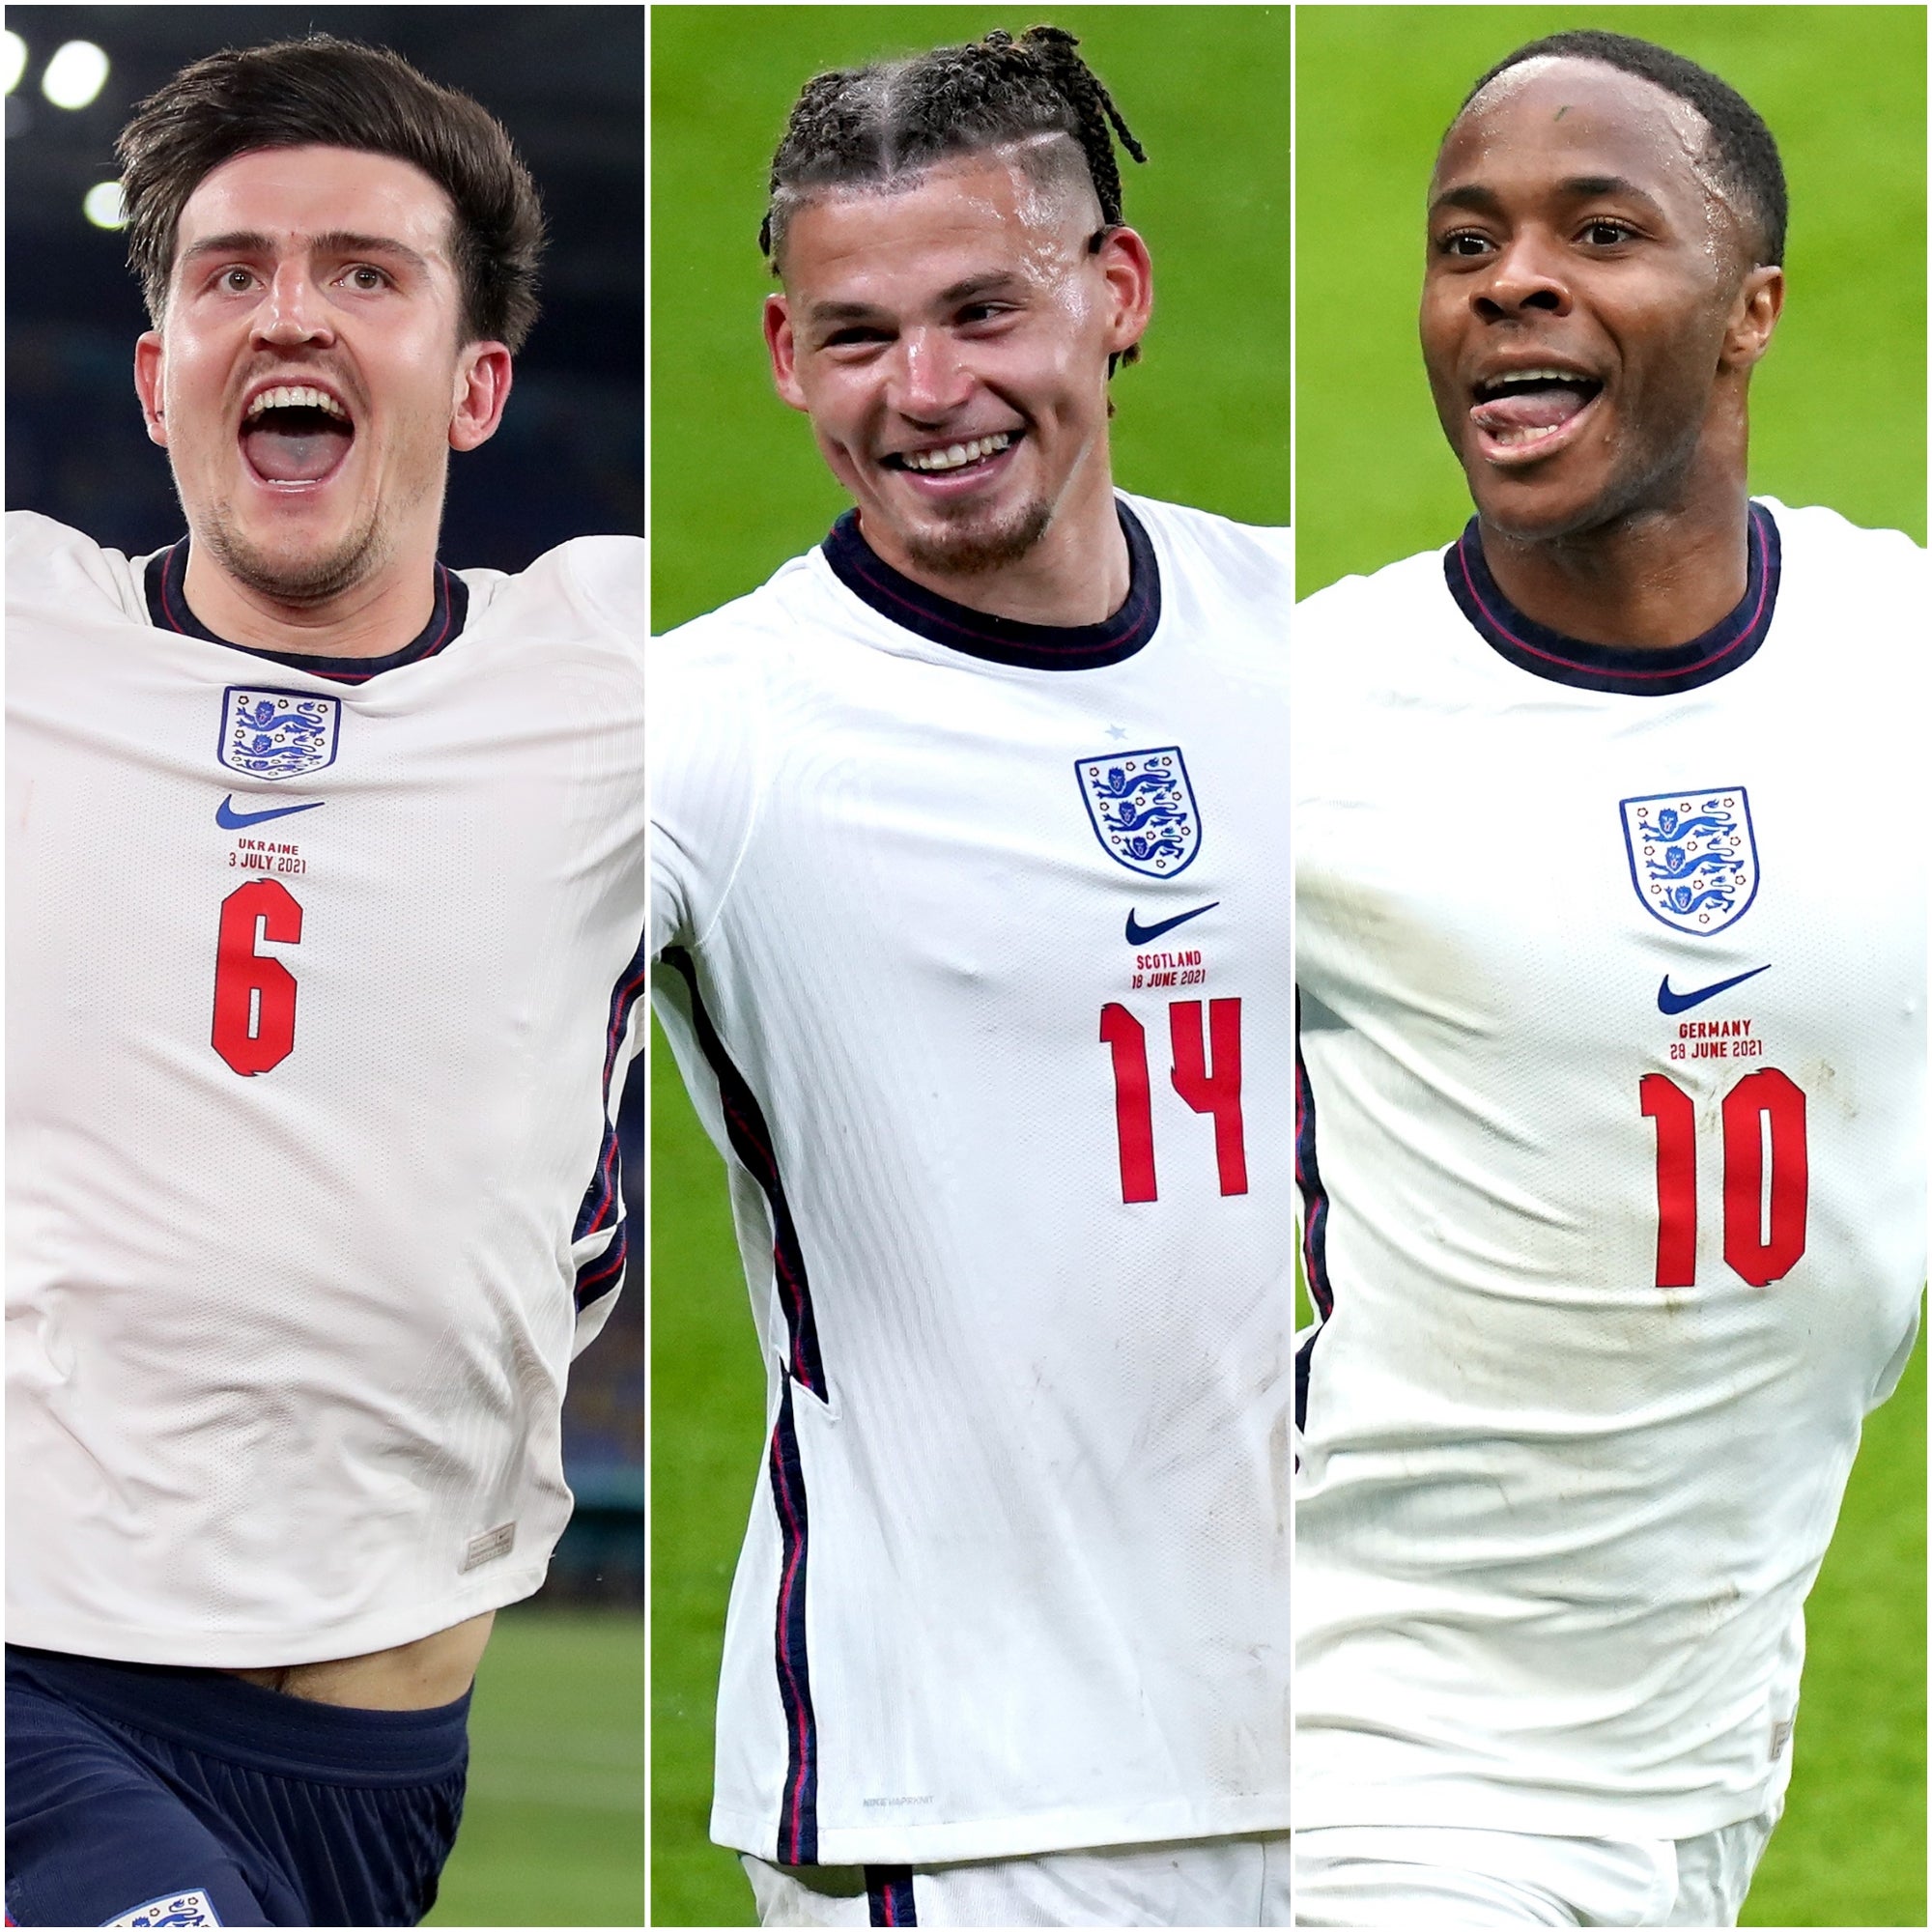 Harry Maguire, Kalvin Phillips and Raheem Sterling have starred for England during the Euros.